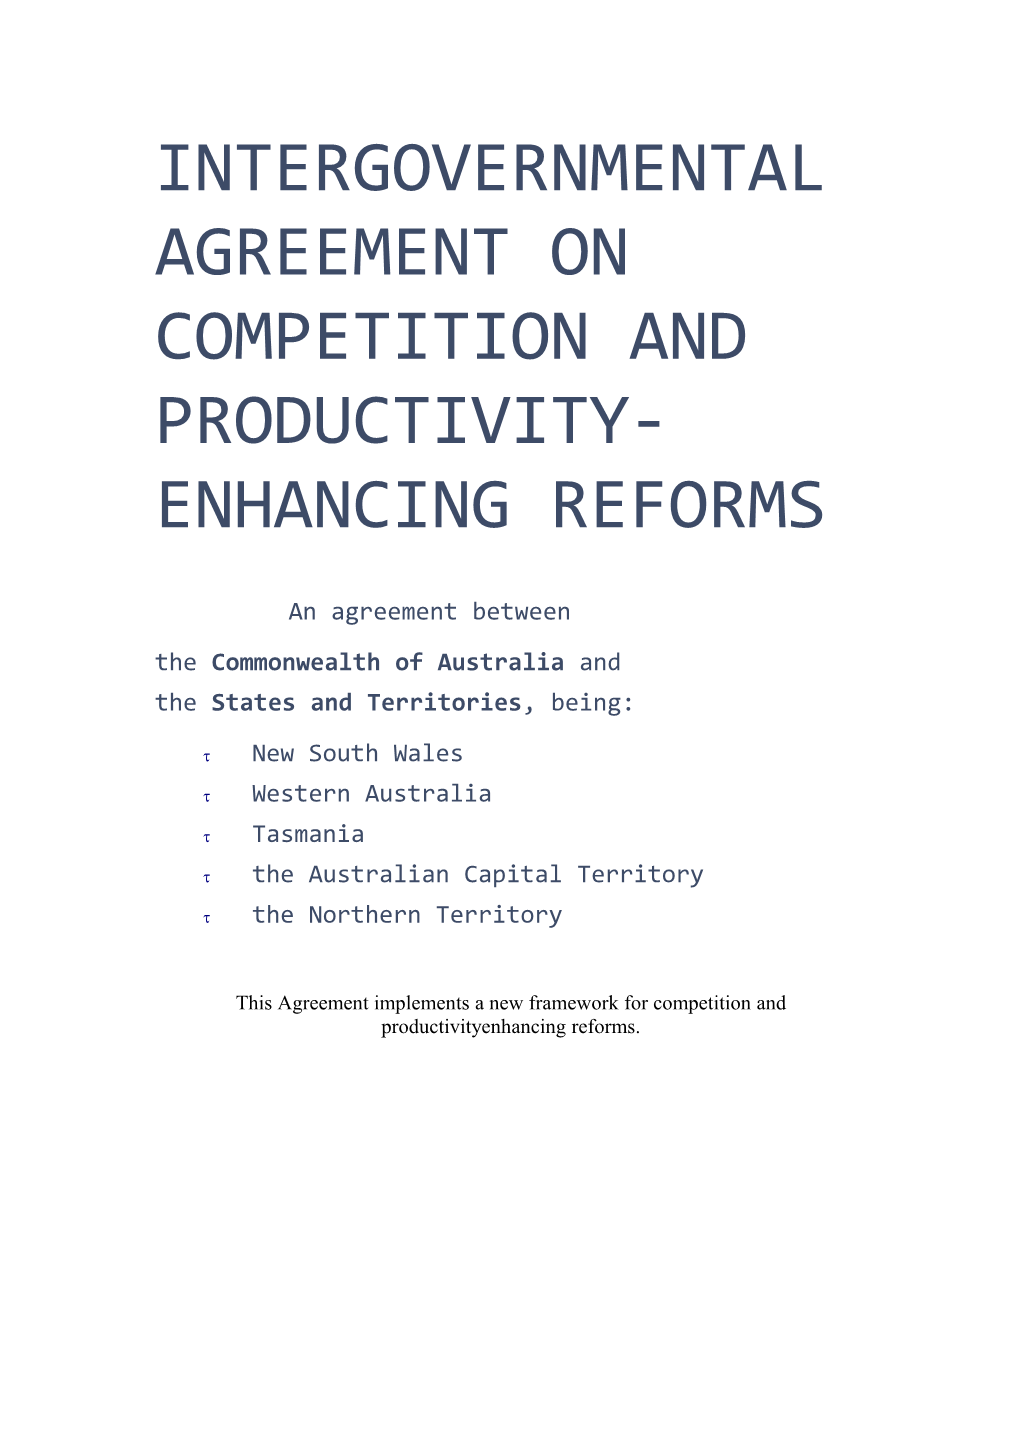 Intergovernmental Agreement on Competition and Productivity-Enhancing Reforms